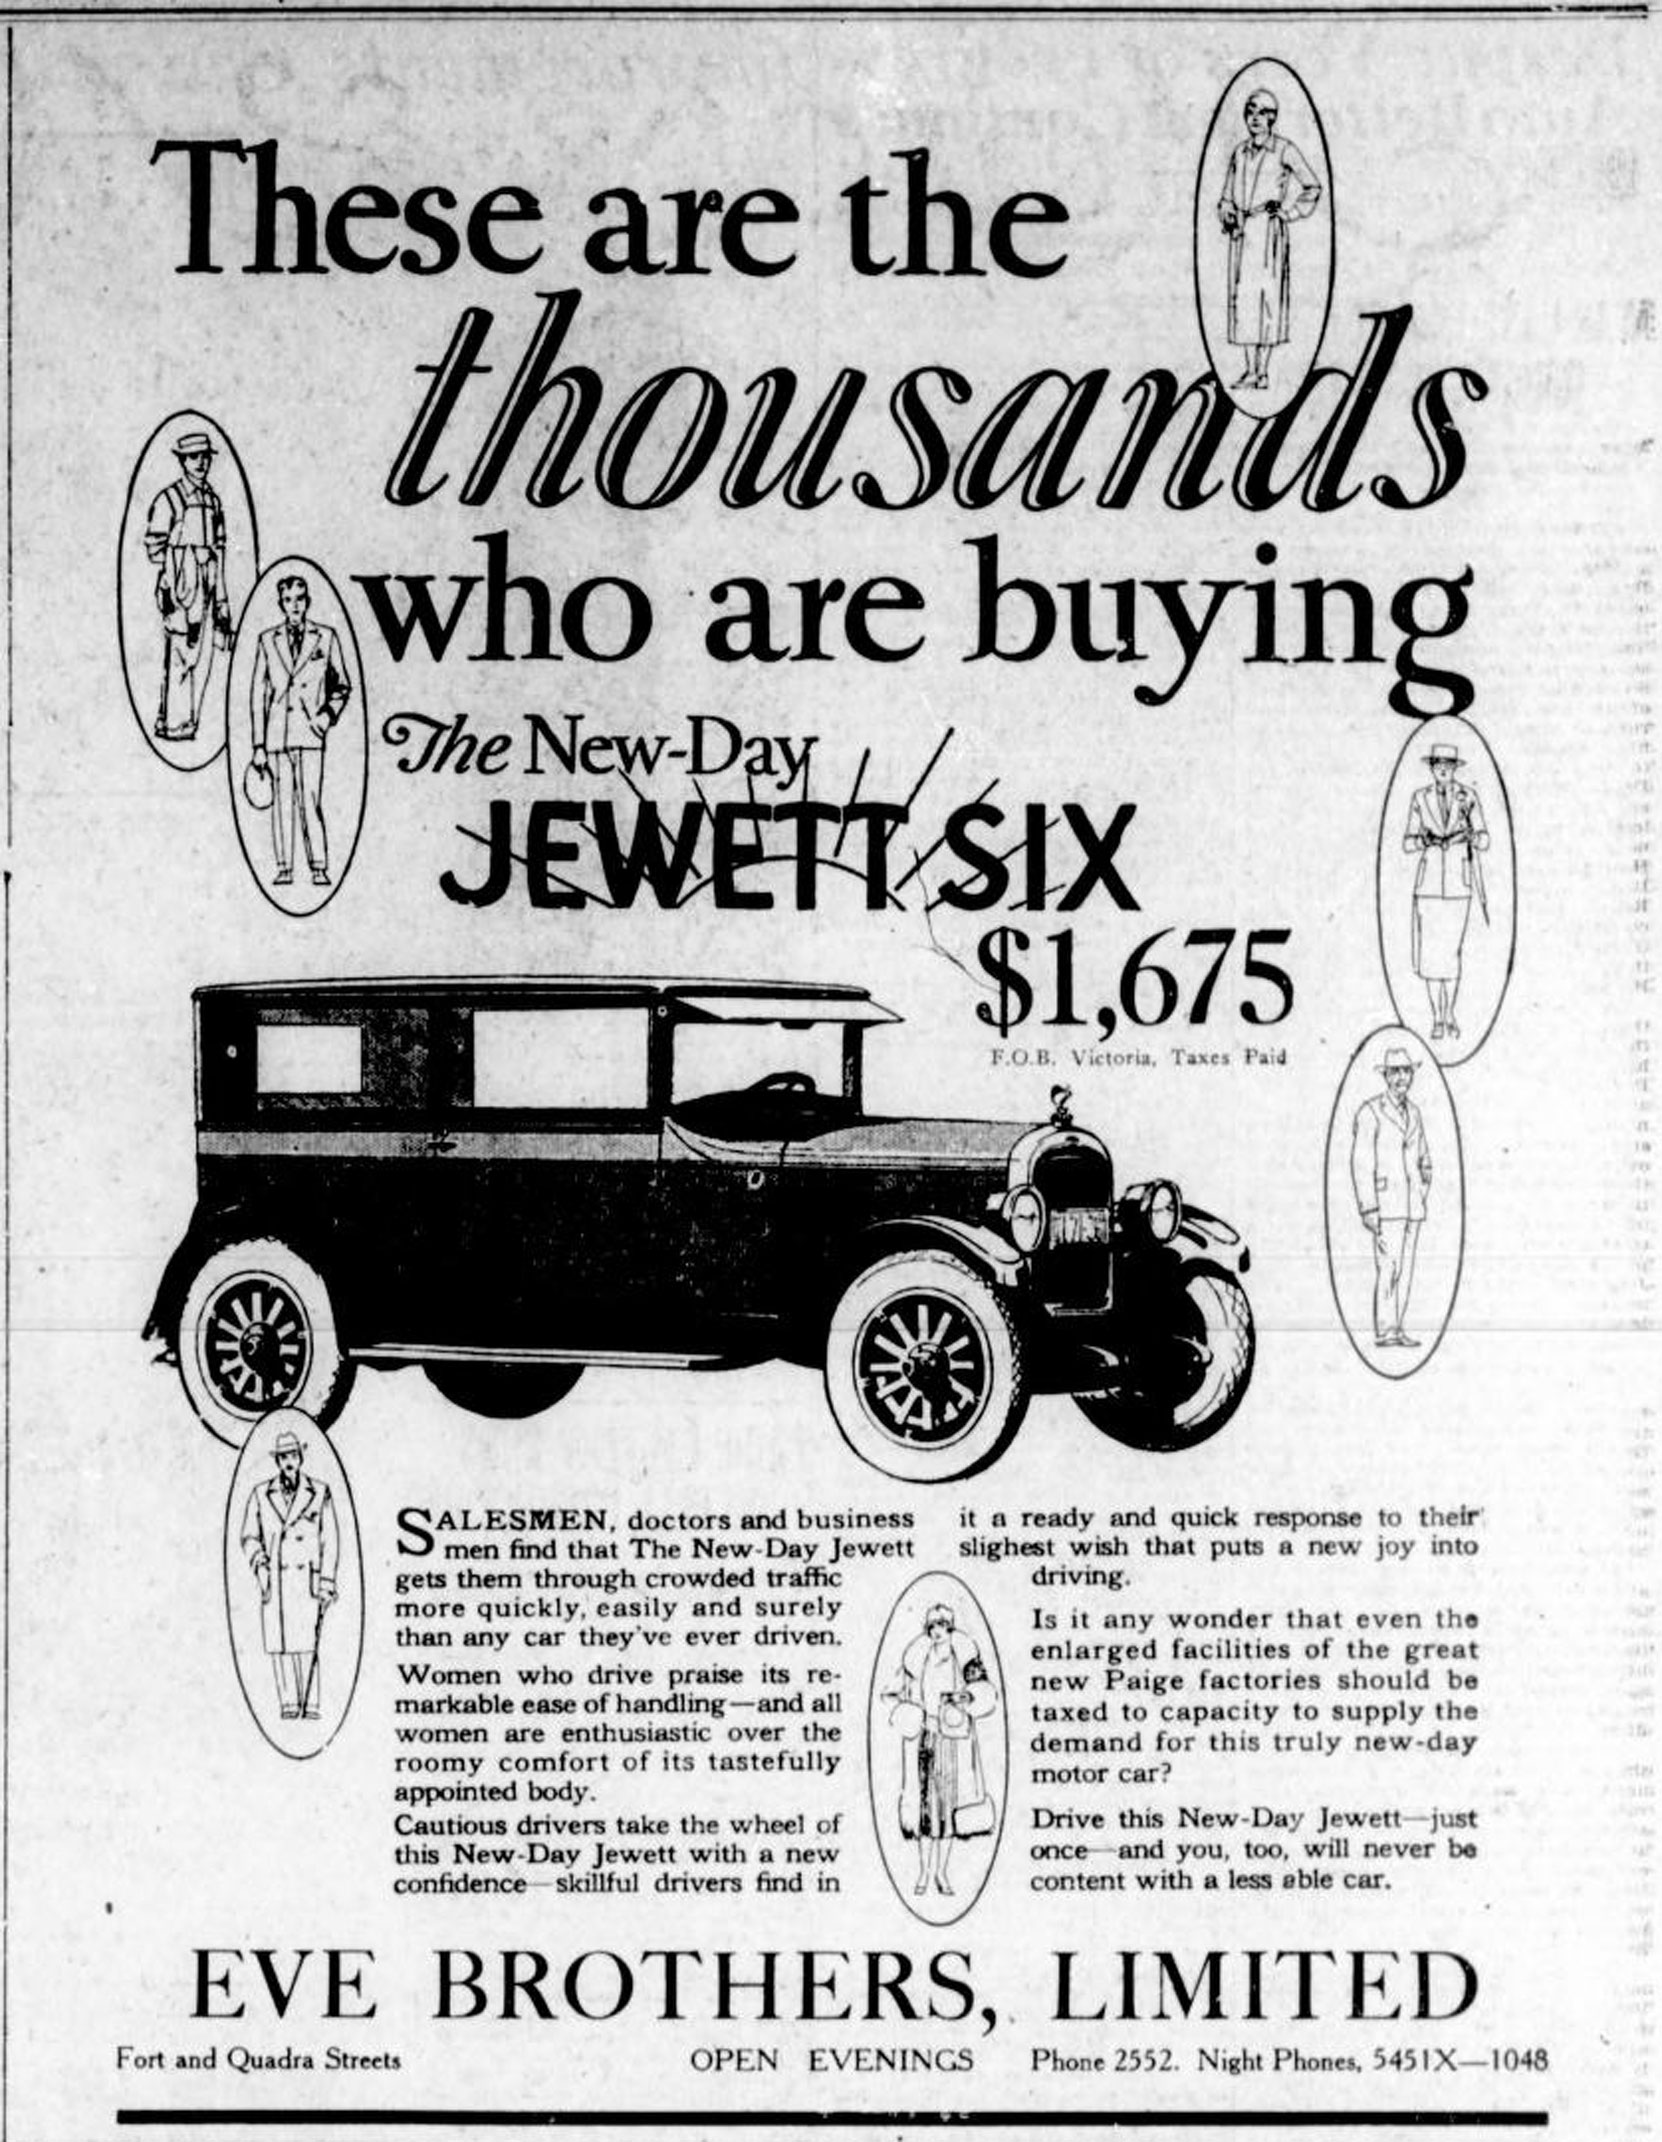 1926 advertisement for Jewett Six automobiles, placed by Eve Brothers Ltd., Fort Street at Quadra Street (900 Fort Street), (Victoria Online Sightseeing Tours collection)